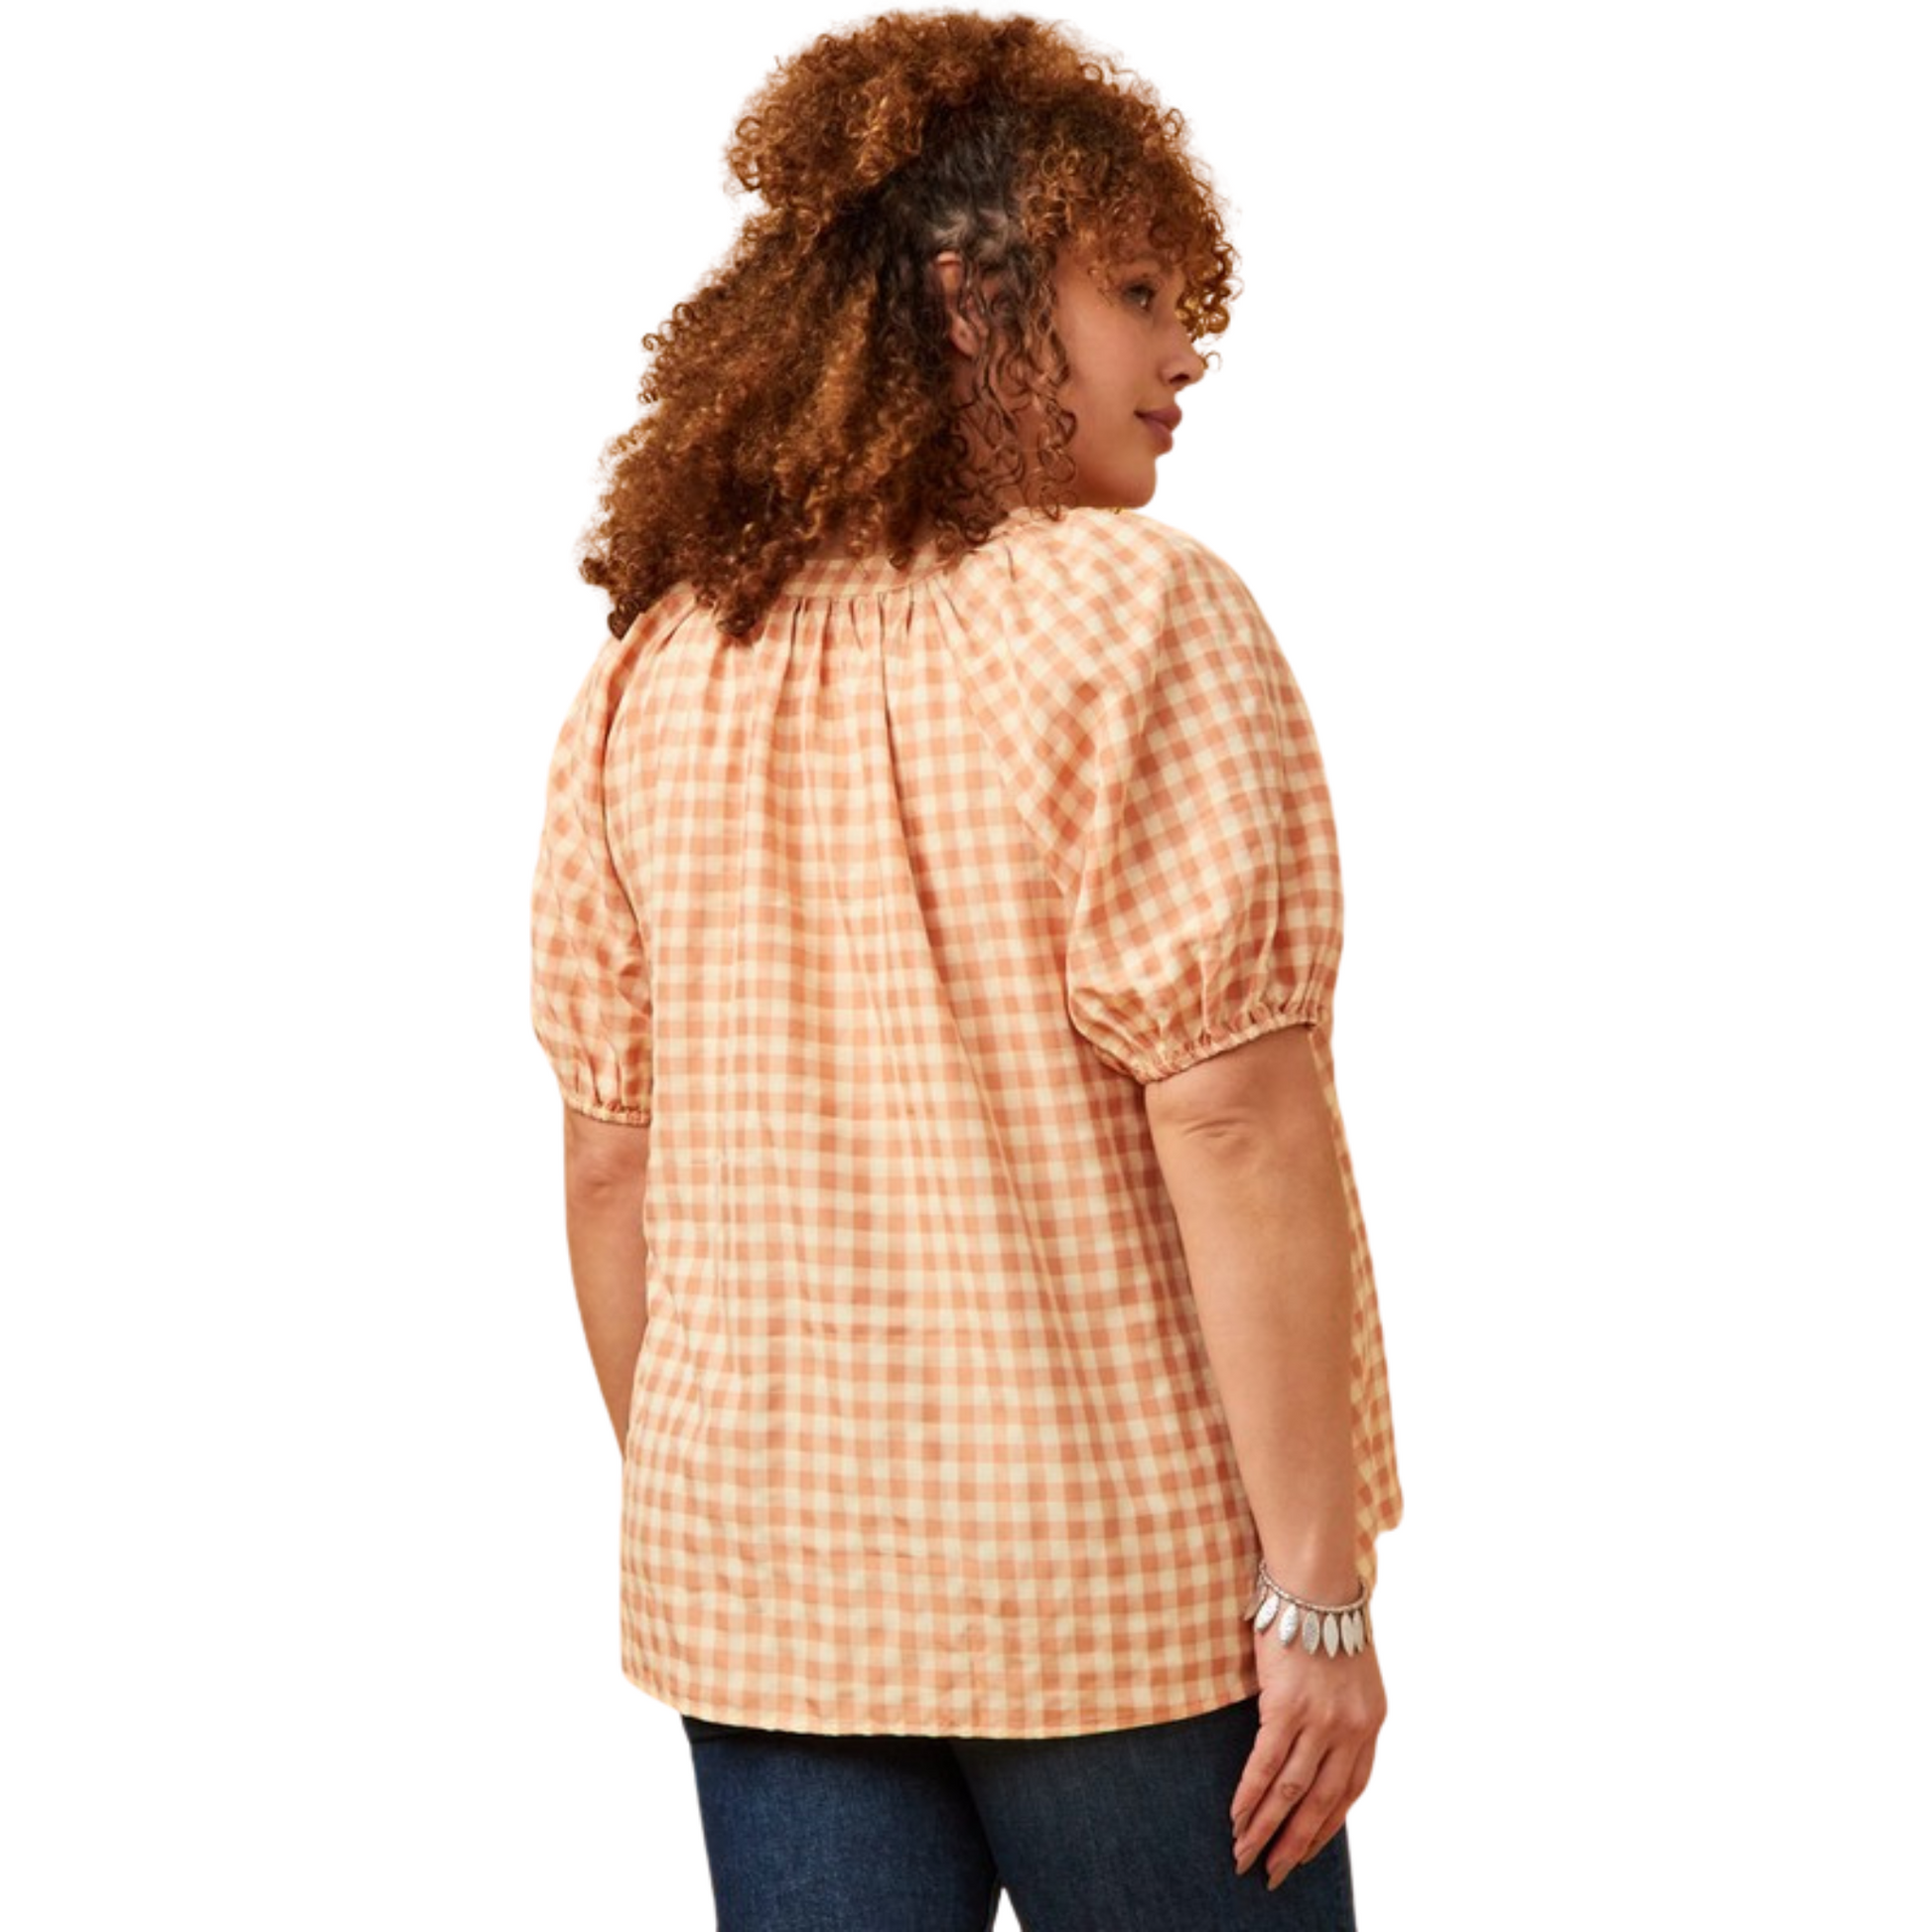 Look stylish with the Gingham Scoop Neck Top. Featuring a peach gingham print and puff sleeves, this top is perfect for a casual or dressy look. Plus sizes are available to flatter any figure. Create a timeless look with this classic piece.